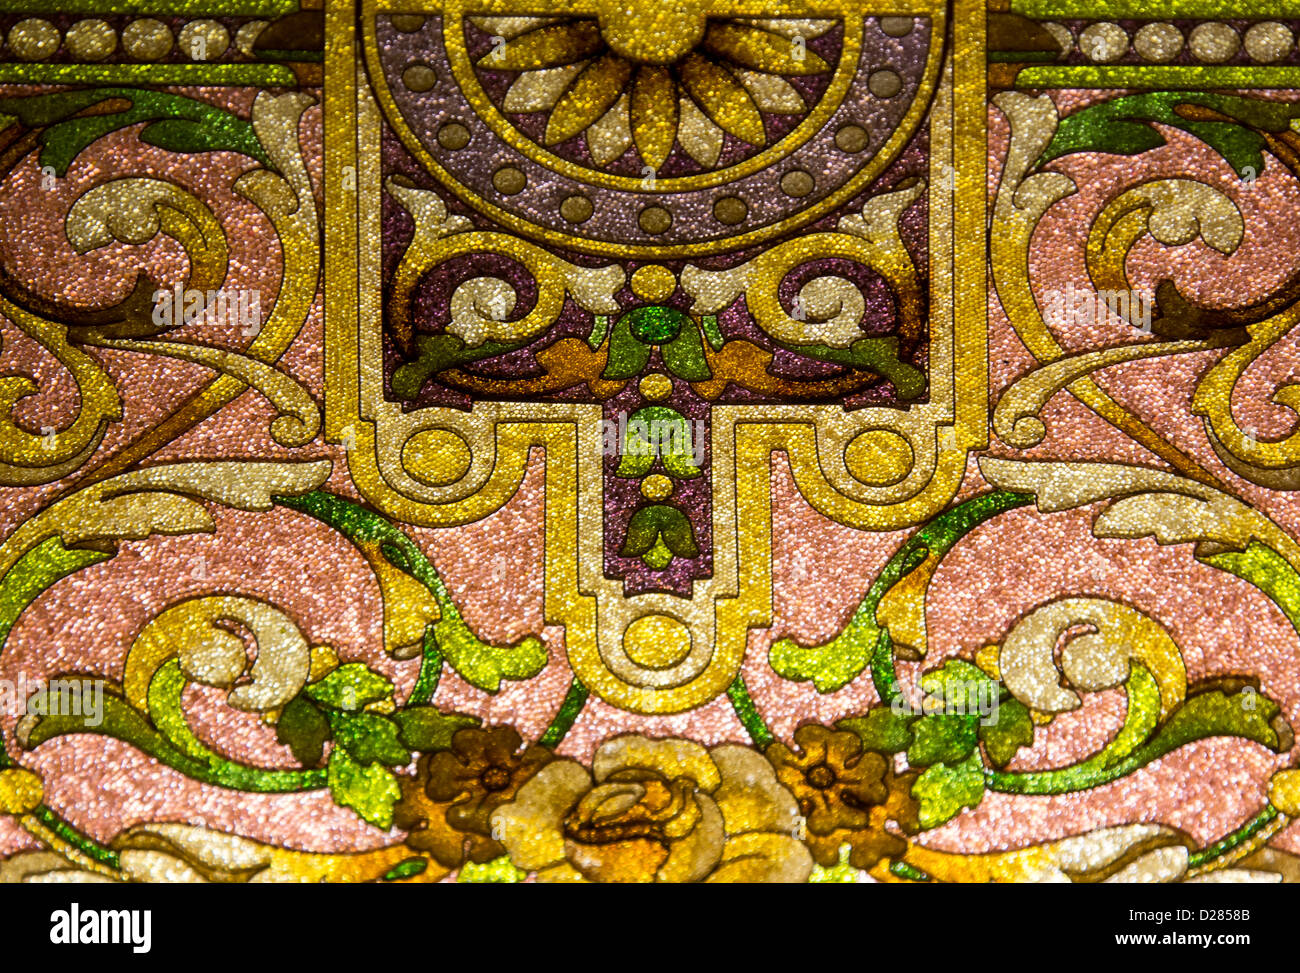 Spain, Barcelona,detail of modernist decor of works on display in the Museu Del Modernisme Català Stock Photo